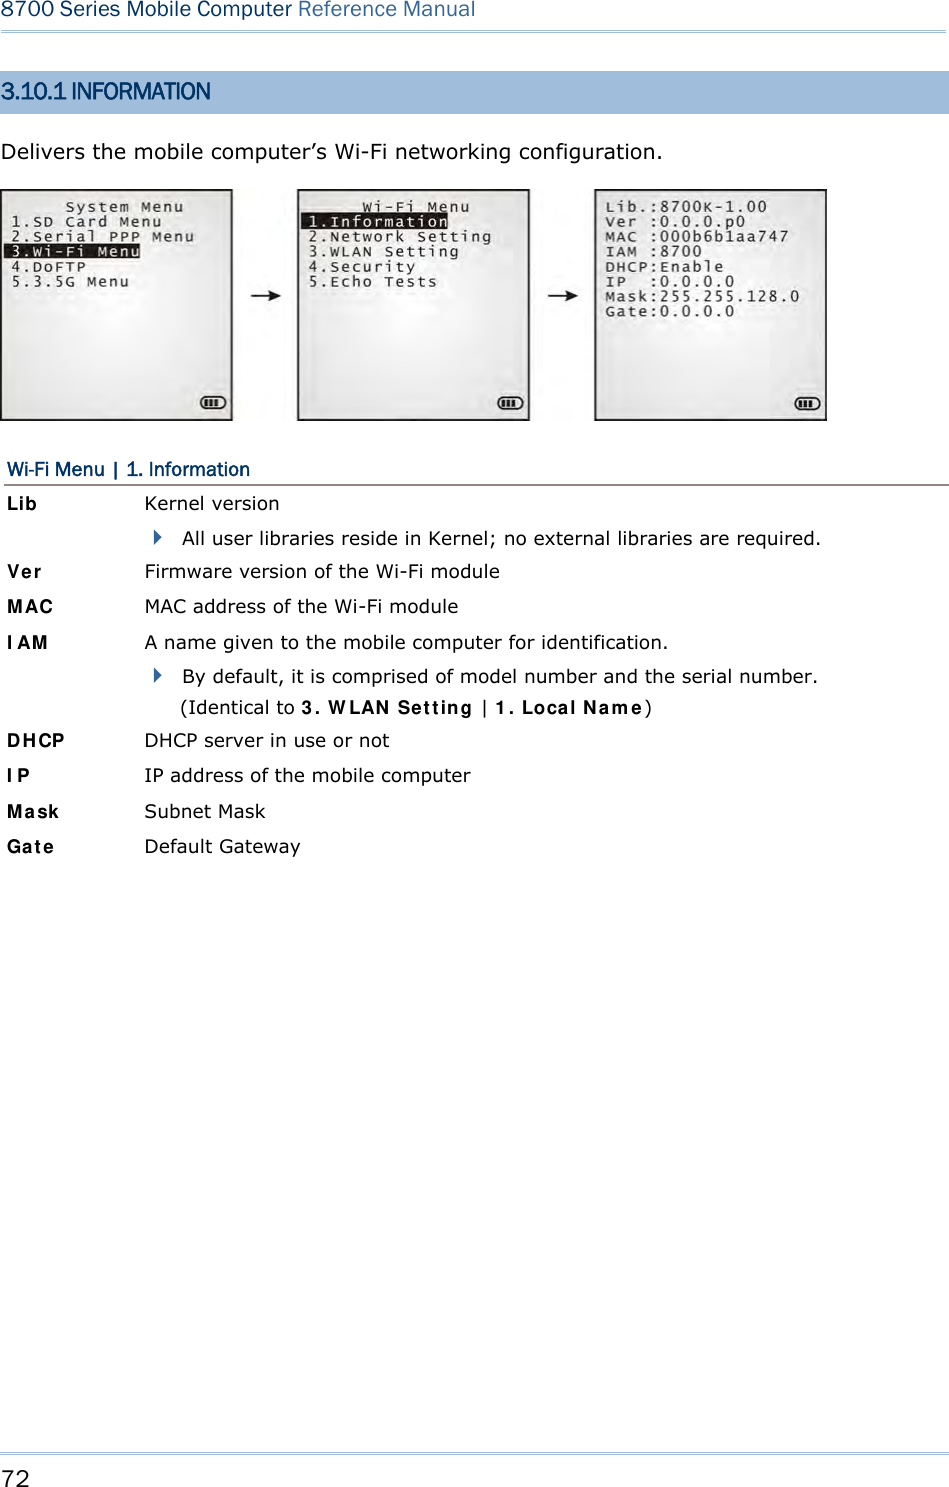 72  8700 Series Mobile Computer Reference Manual  3.10.1 INFORMATION Delivers the mobile computer’s Wi-Fi networking configuration.  Wi-Fi Menu | 1. Information Lib Kernel version  All user libraries reside in Kernel; no external libraries are required. Ver Firmware version of the Wi-Fi module MAC  MAC address of the Wi-Fi module IAM  A name given to the mobile computer for identification.  By default, it is comprised of model number and the serial number. (Identical to 3. WLAN Setting | 1. Local Name) DHCP  DHCP server in use or not IP  IP address of the mobile computer Mask  Subnet Mask Gate  Default Gateway            